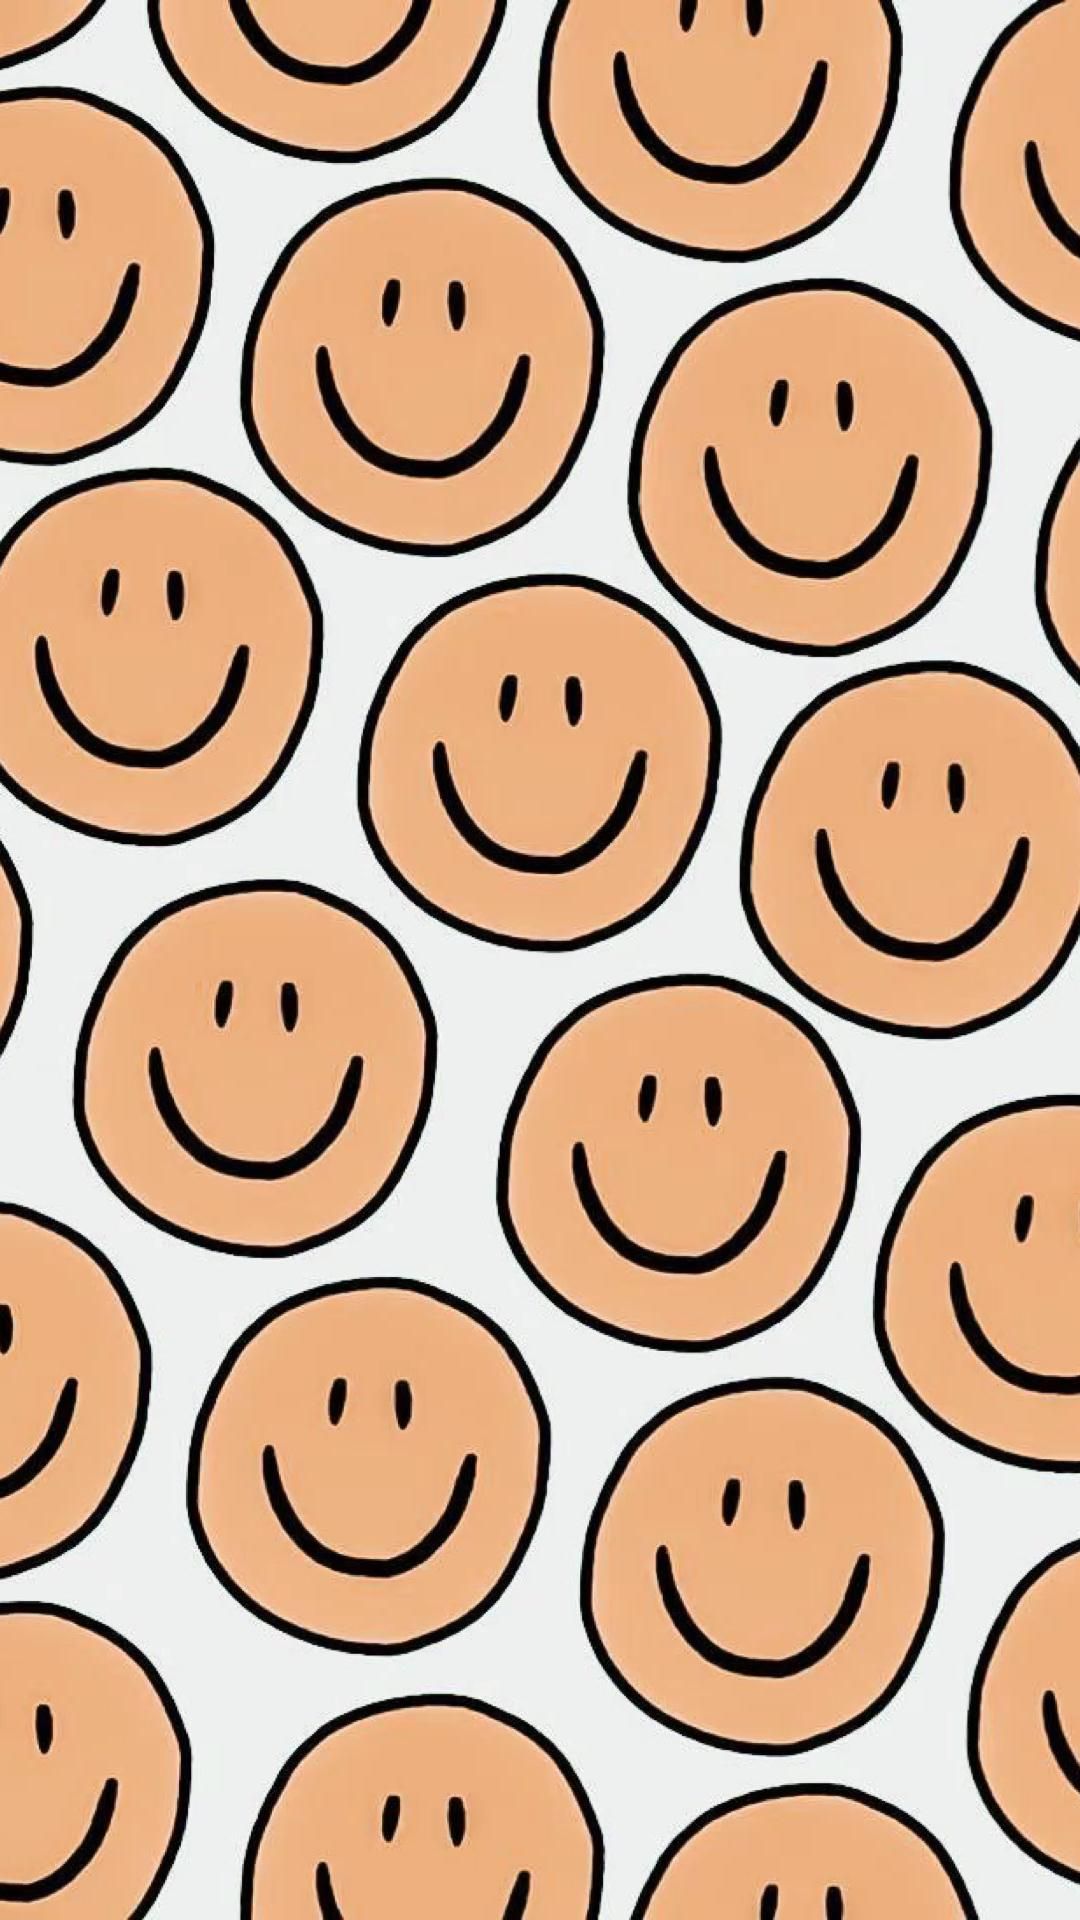 IPhone wallpaper with smiley faces. - Smiley